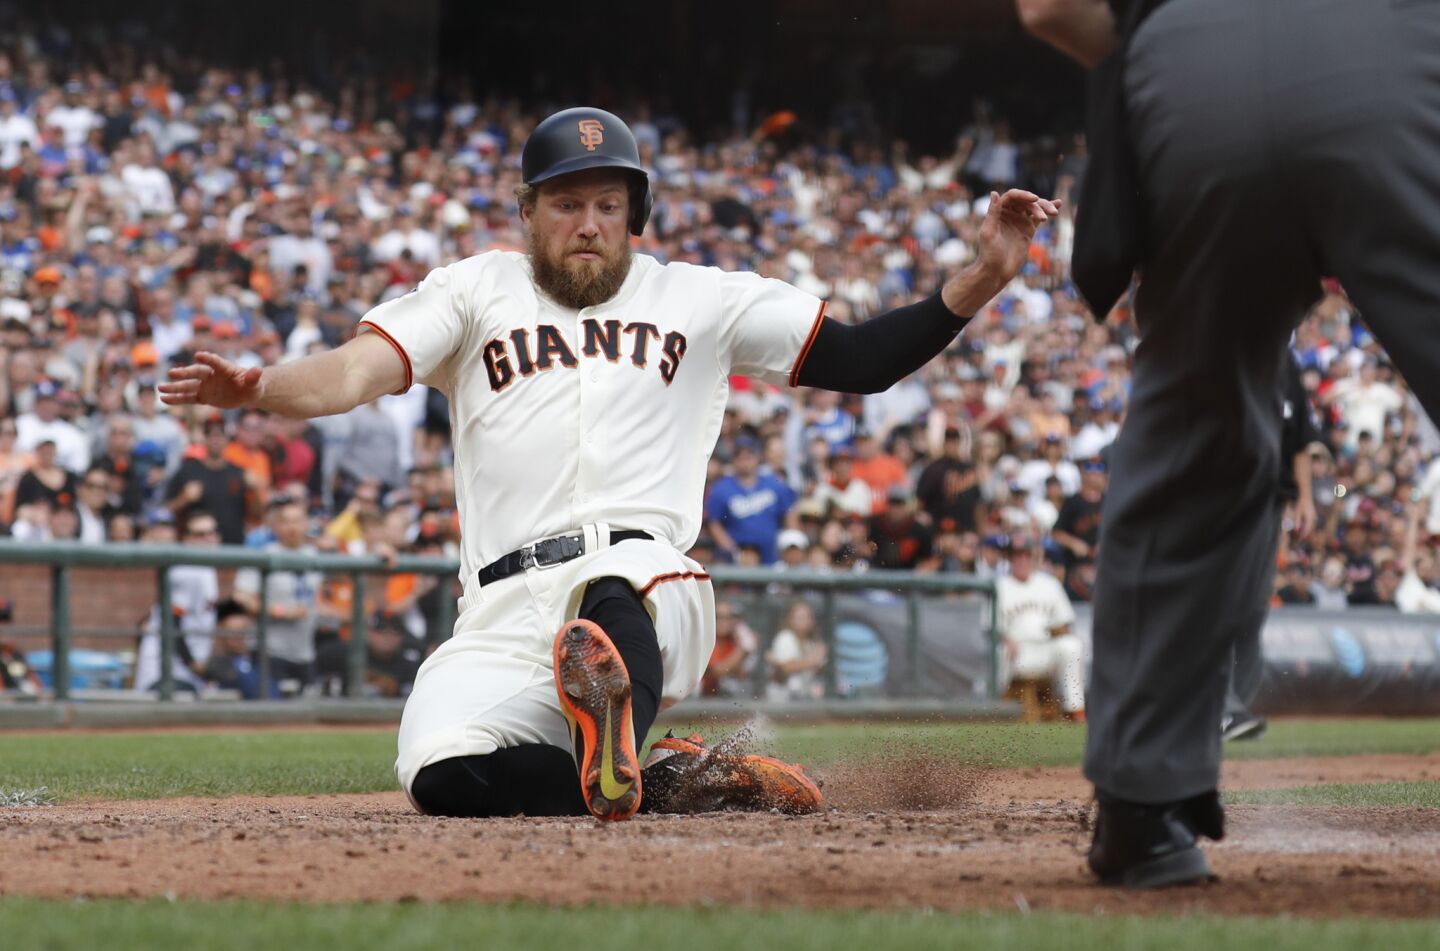 San Francisco Giants' Hunter Pence (8) scores to tie the game against the Los Angeles Dodgers during the fifth inning of a baseball game in San Francisco, Saturday, Sept. 29, 2018. (AP Photo/Jim Gensheimer)